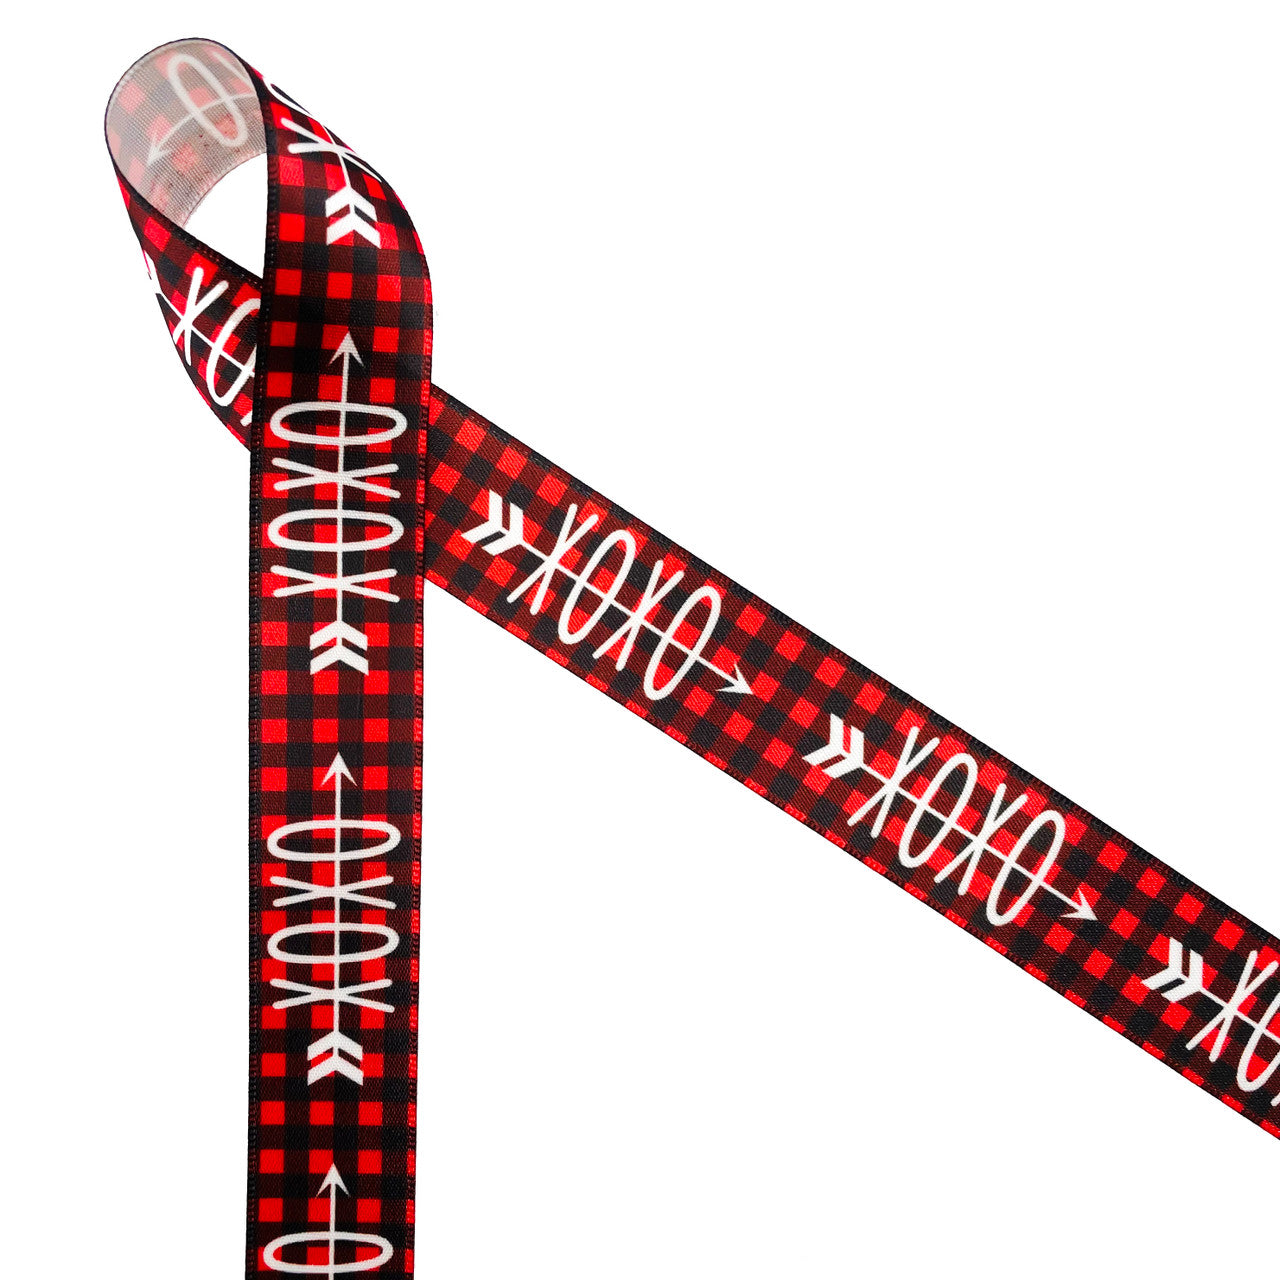 Valentine ribbon with cupids arrow through X's and O's on a red and black buffalo plaid background printed on 7/8" white single face satin is a fun ribbon for your gentleman Valentine. This is an ideal ribbon for gift wrap, gift baskets, party decor, sweet shops, candy shops, chocolatiers and bakeries. Use this ribbon on all your creative crafts including wreath making, sewing, quilting, and scrap booking. All our ribbon is designed and printed in the USA